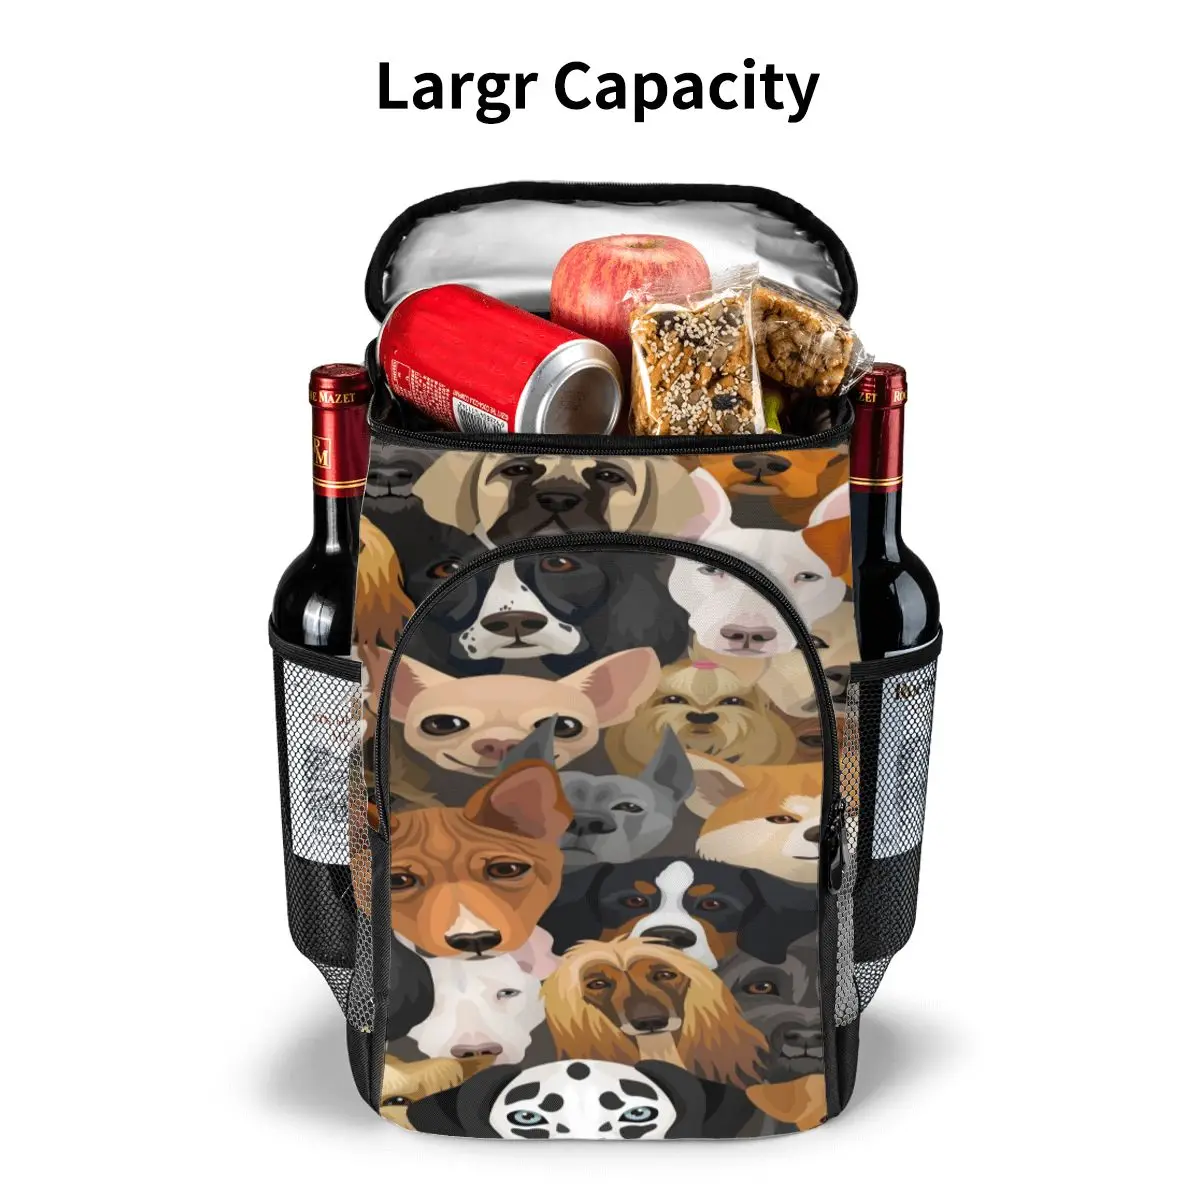 protable insulated thermal cooler waterproof lunch bag dogs different breeds picnic camping backpack double shoulder wine bag free global shipping